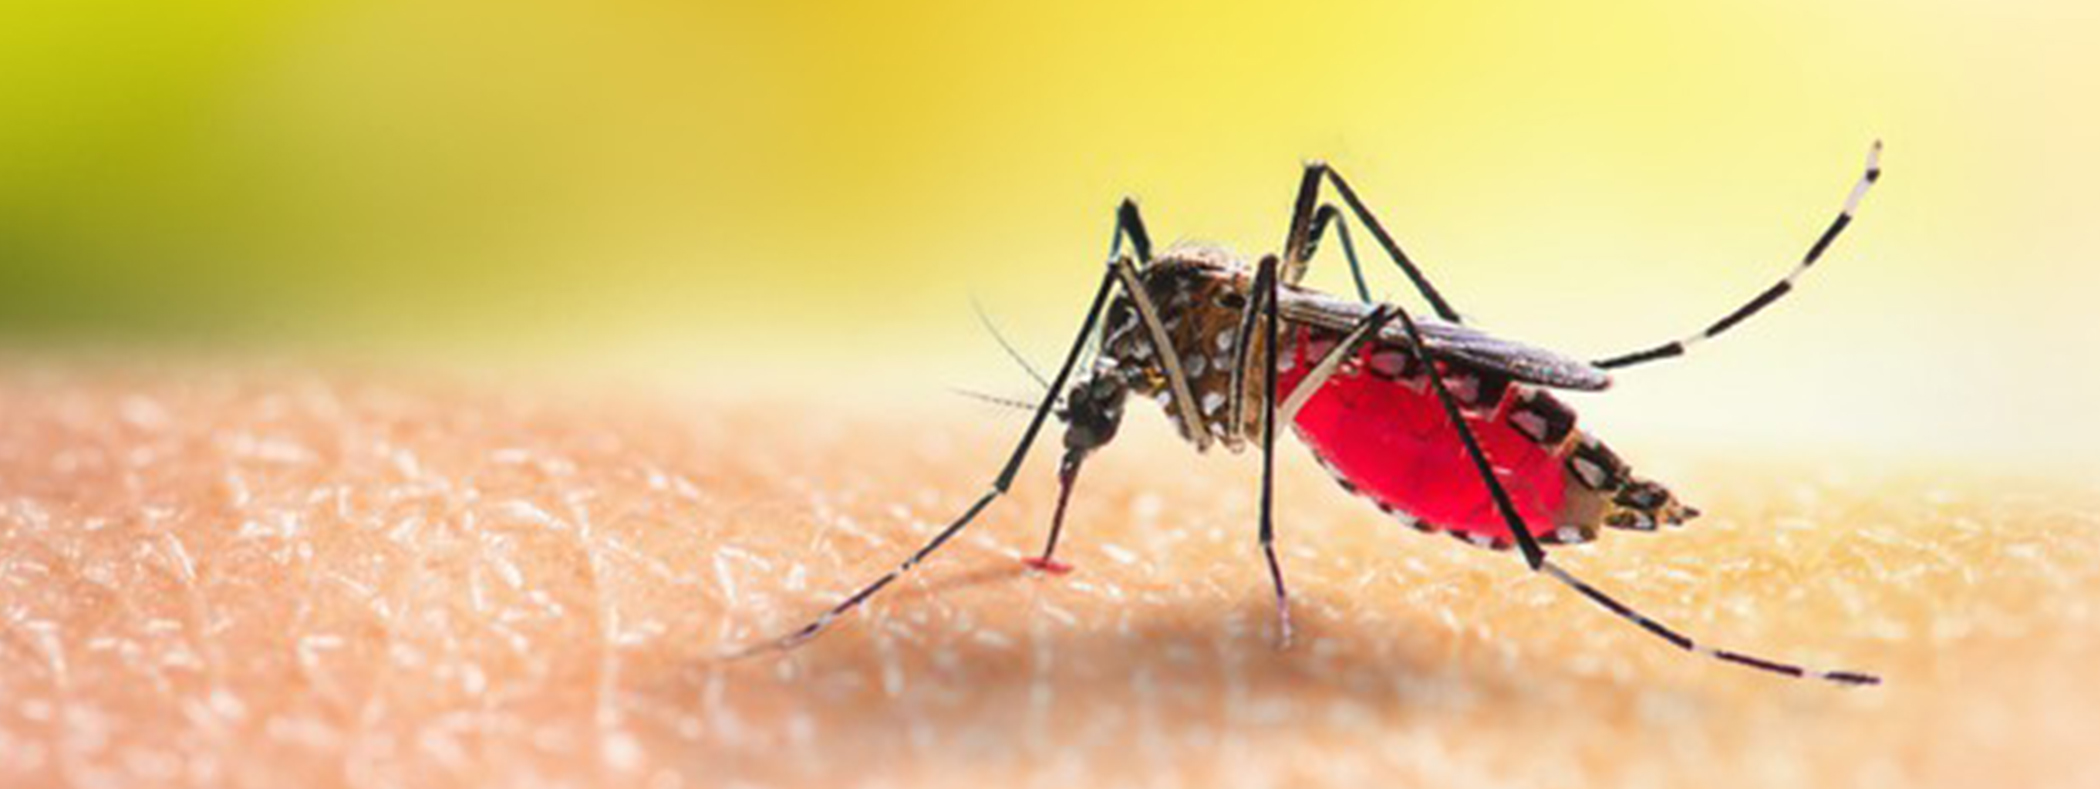 Do Mosquitos Have Their Own Blood